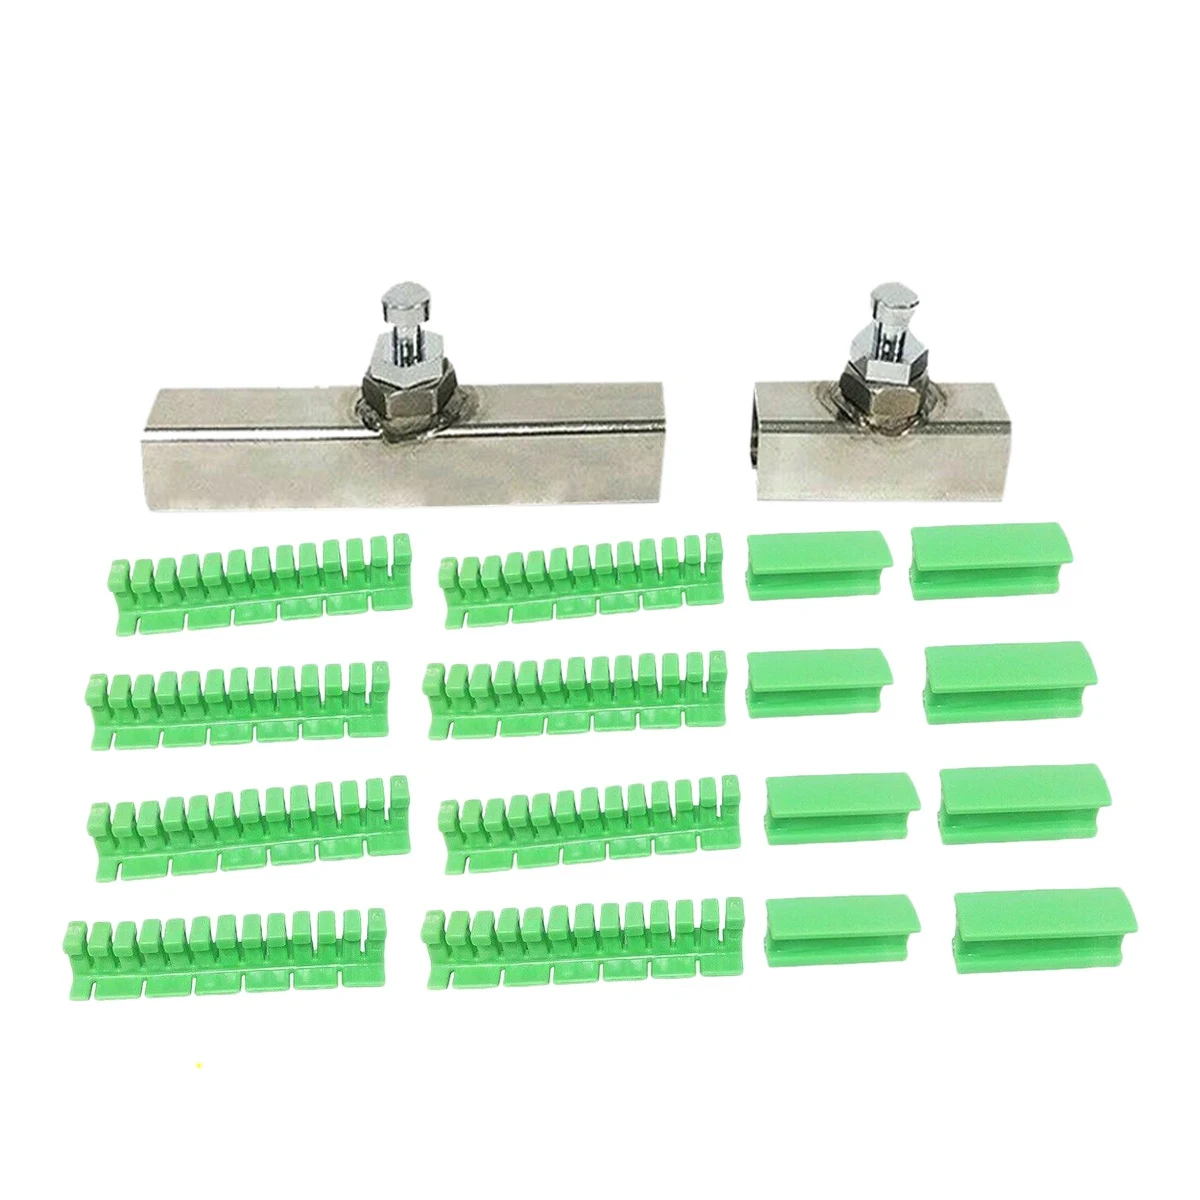 

18X Paintless Dent Removal Puller Tabs Teeth Tools Kit with Glue Sticks for Dent Repair of Car Body Hail Damage Green